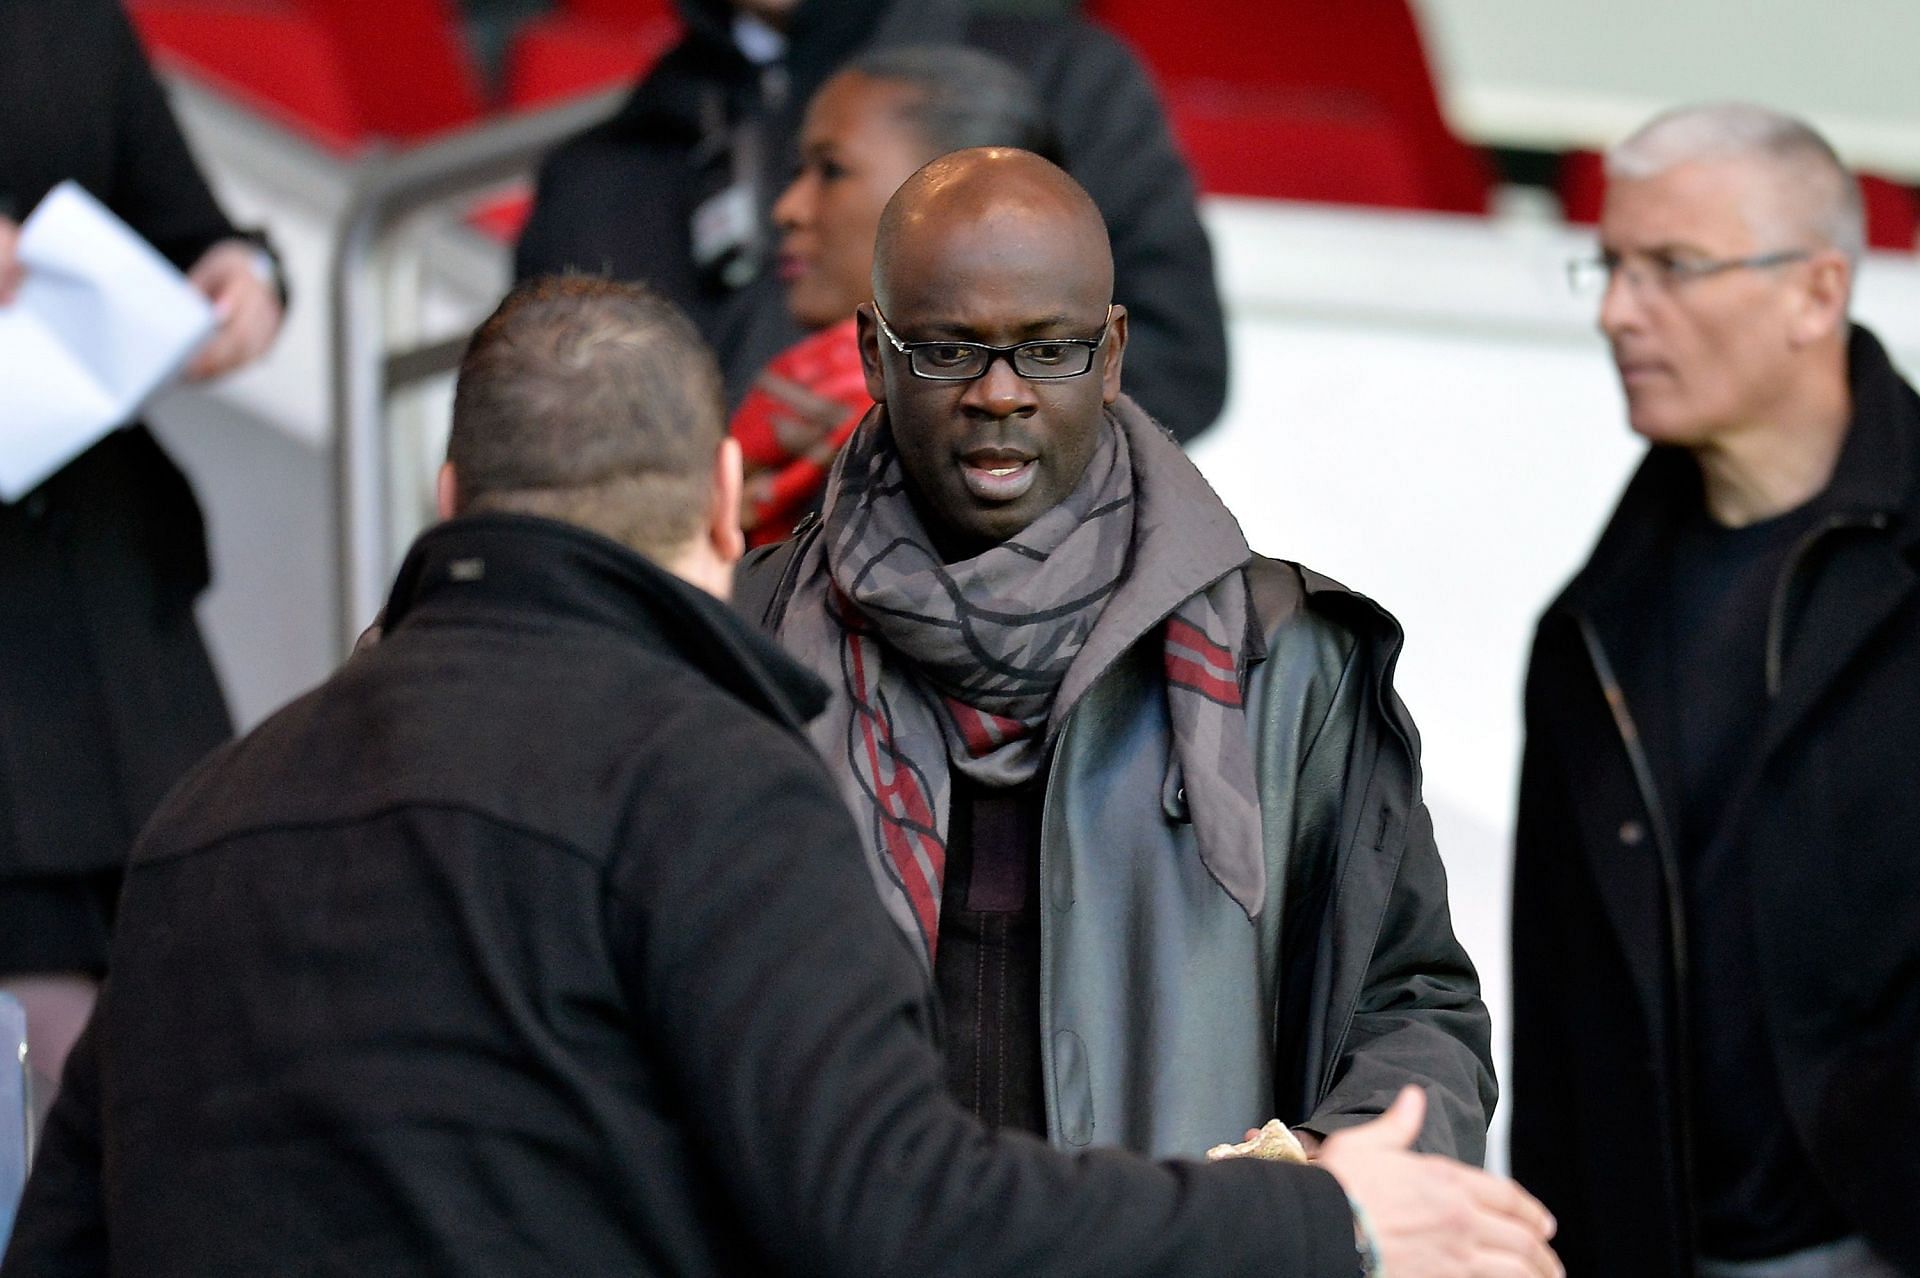 Lilian Thuram believes PSG have the edge over Real Madrid in their upcoming UEFA Champions League tie.